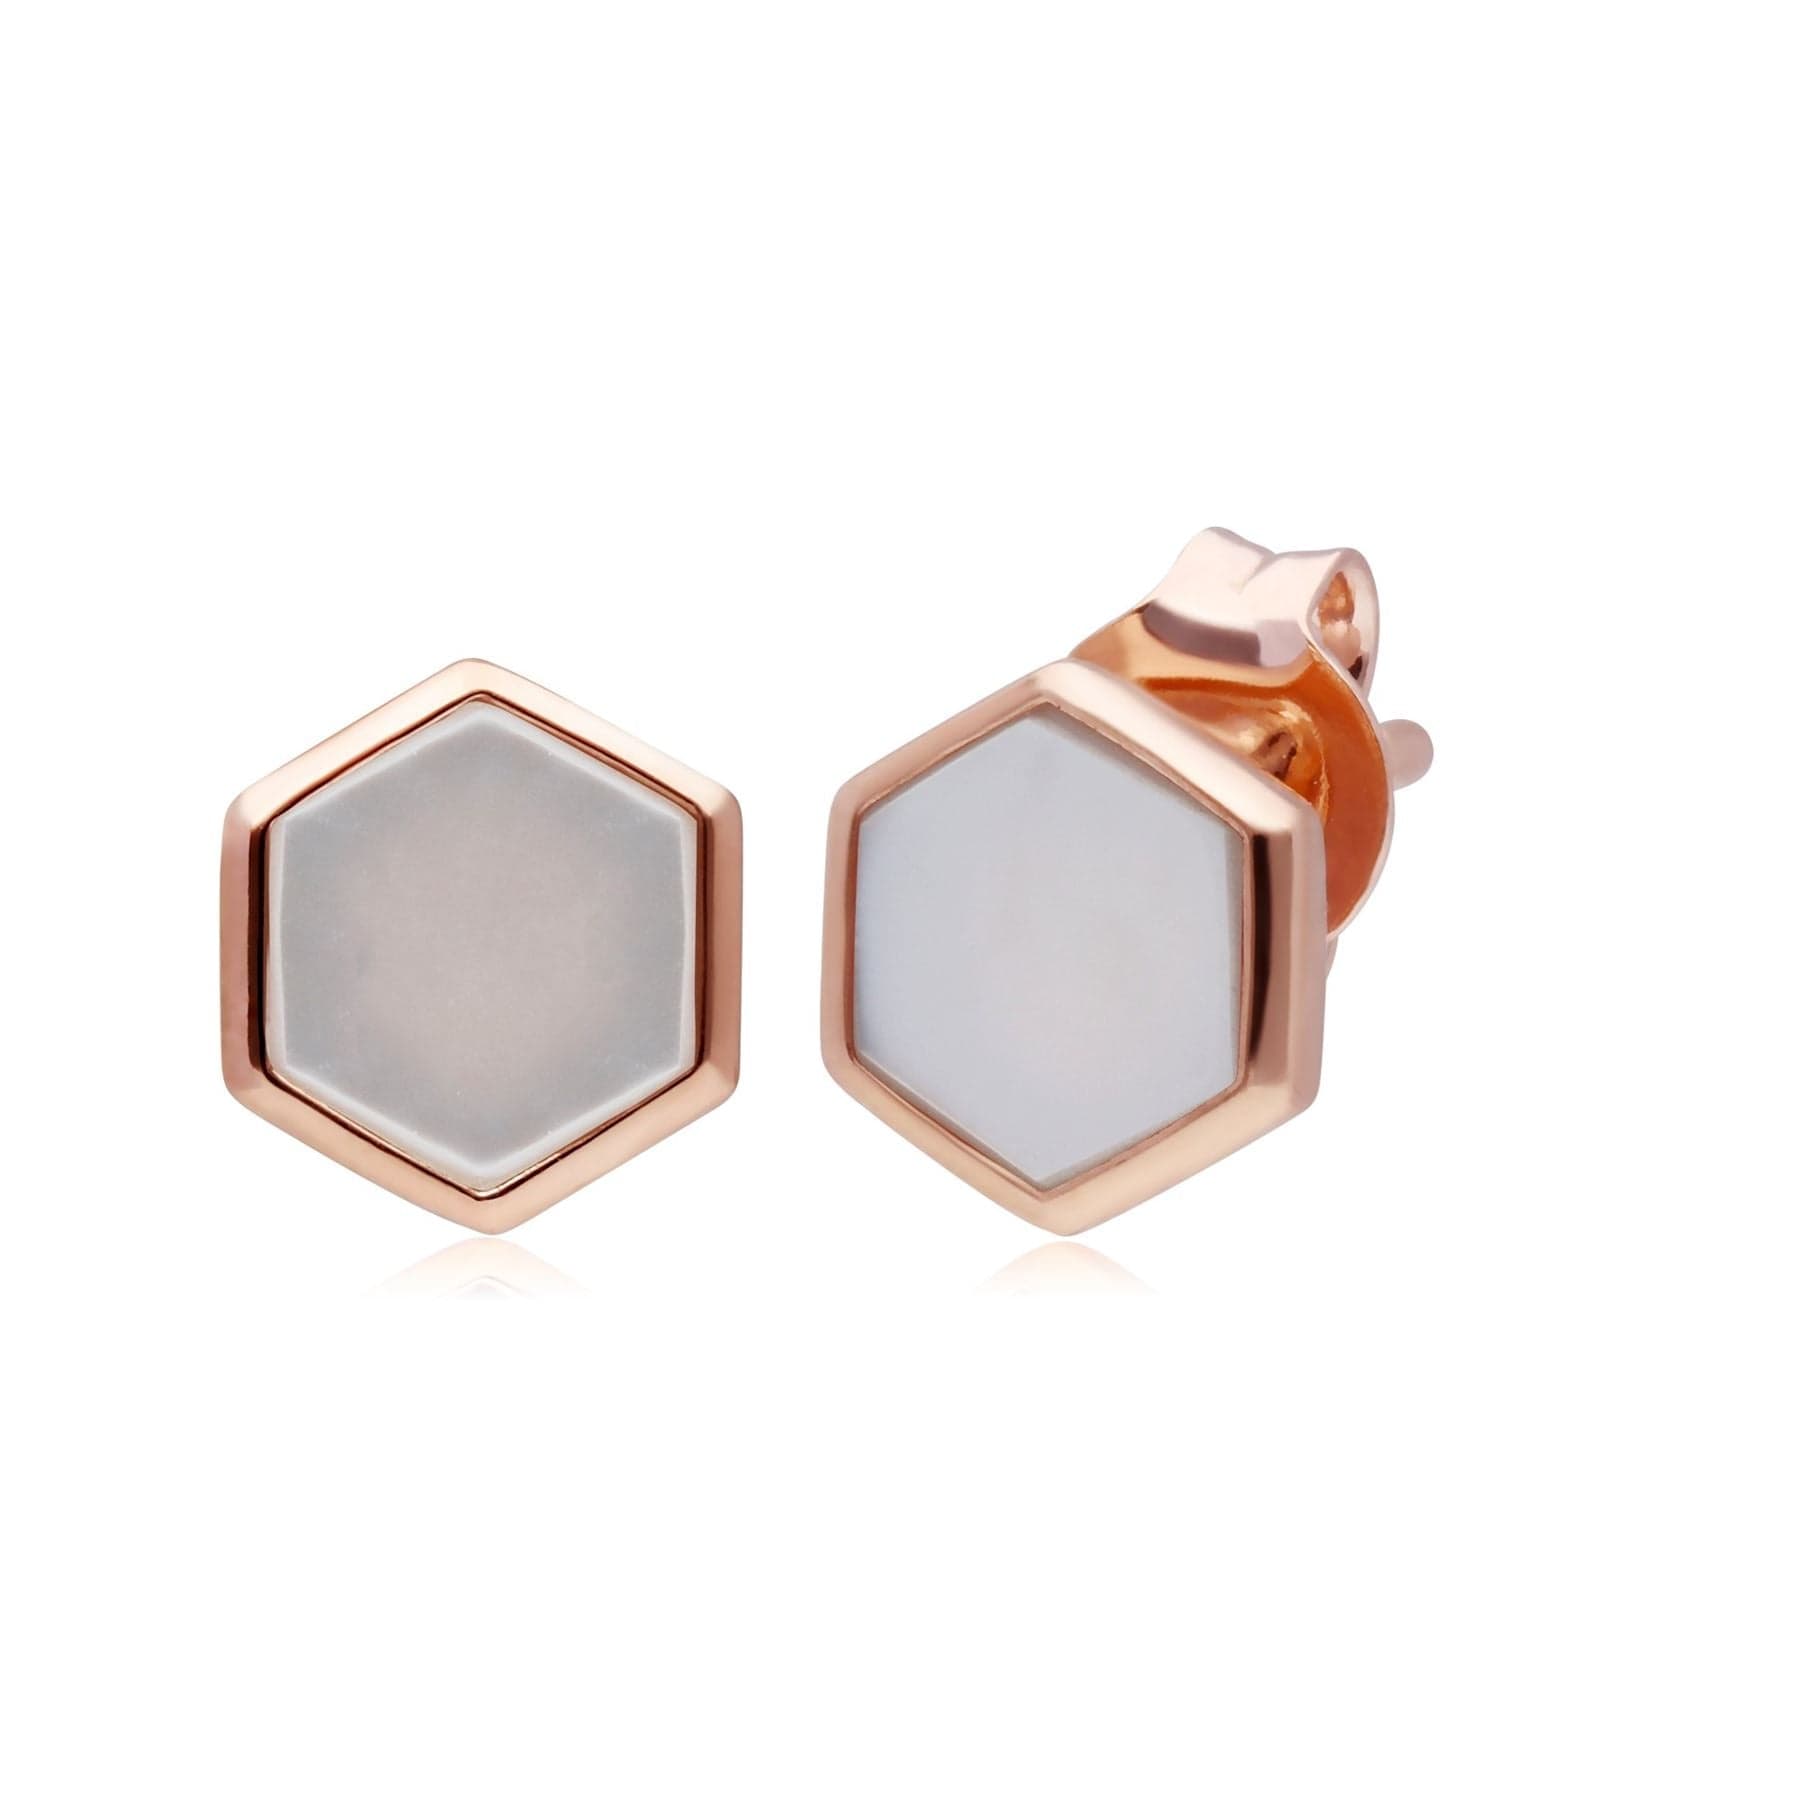 Micro Statement Mother of Pearl Stud Earrings in Rose Gold Plated 925 Sterling Silver